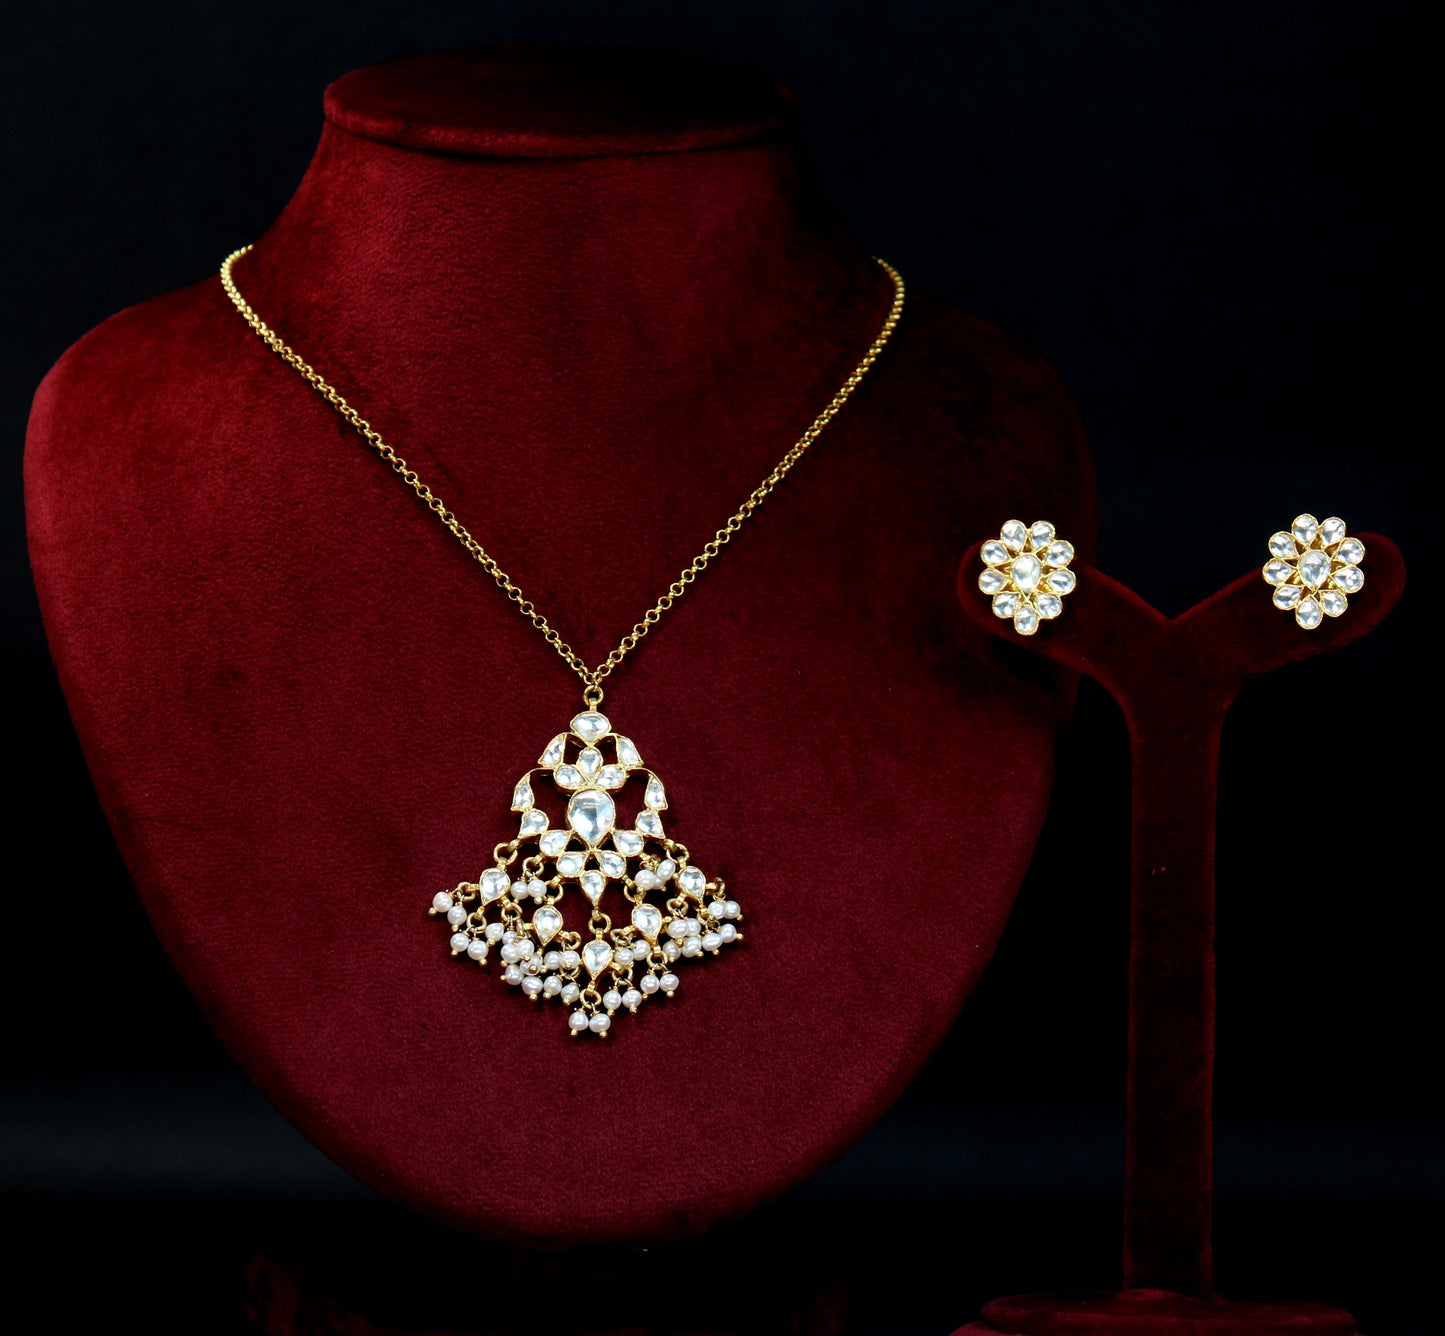 NECKLACE in 92.5 STERLING SILVER, GOLD PLATED in KUNDAN & FRESH WATER PEARLS.